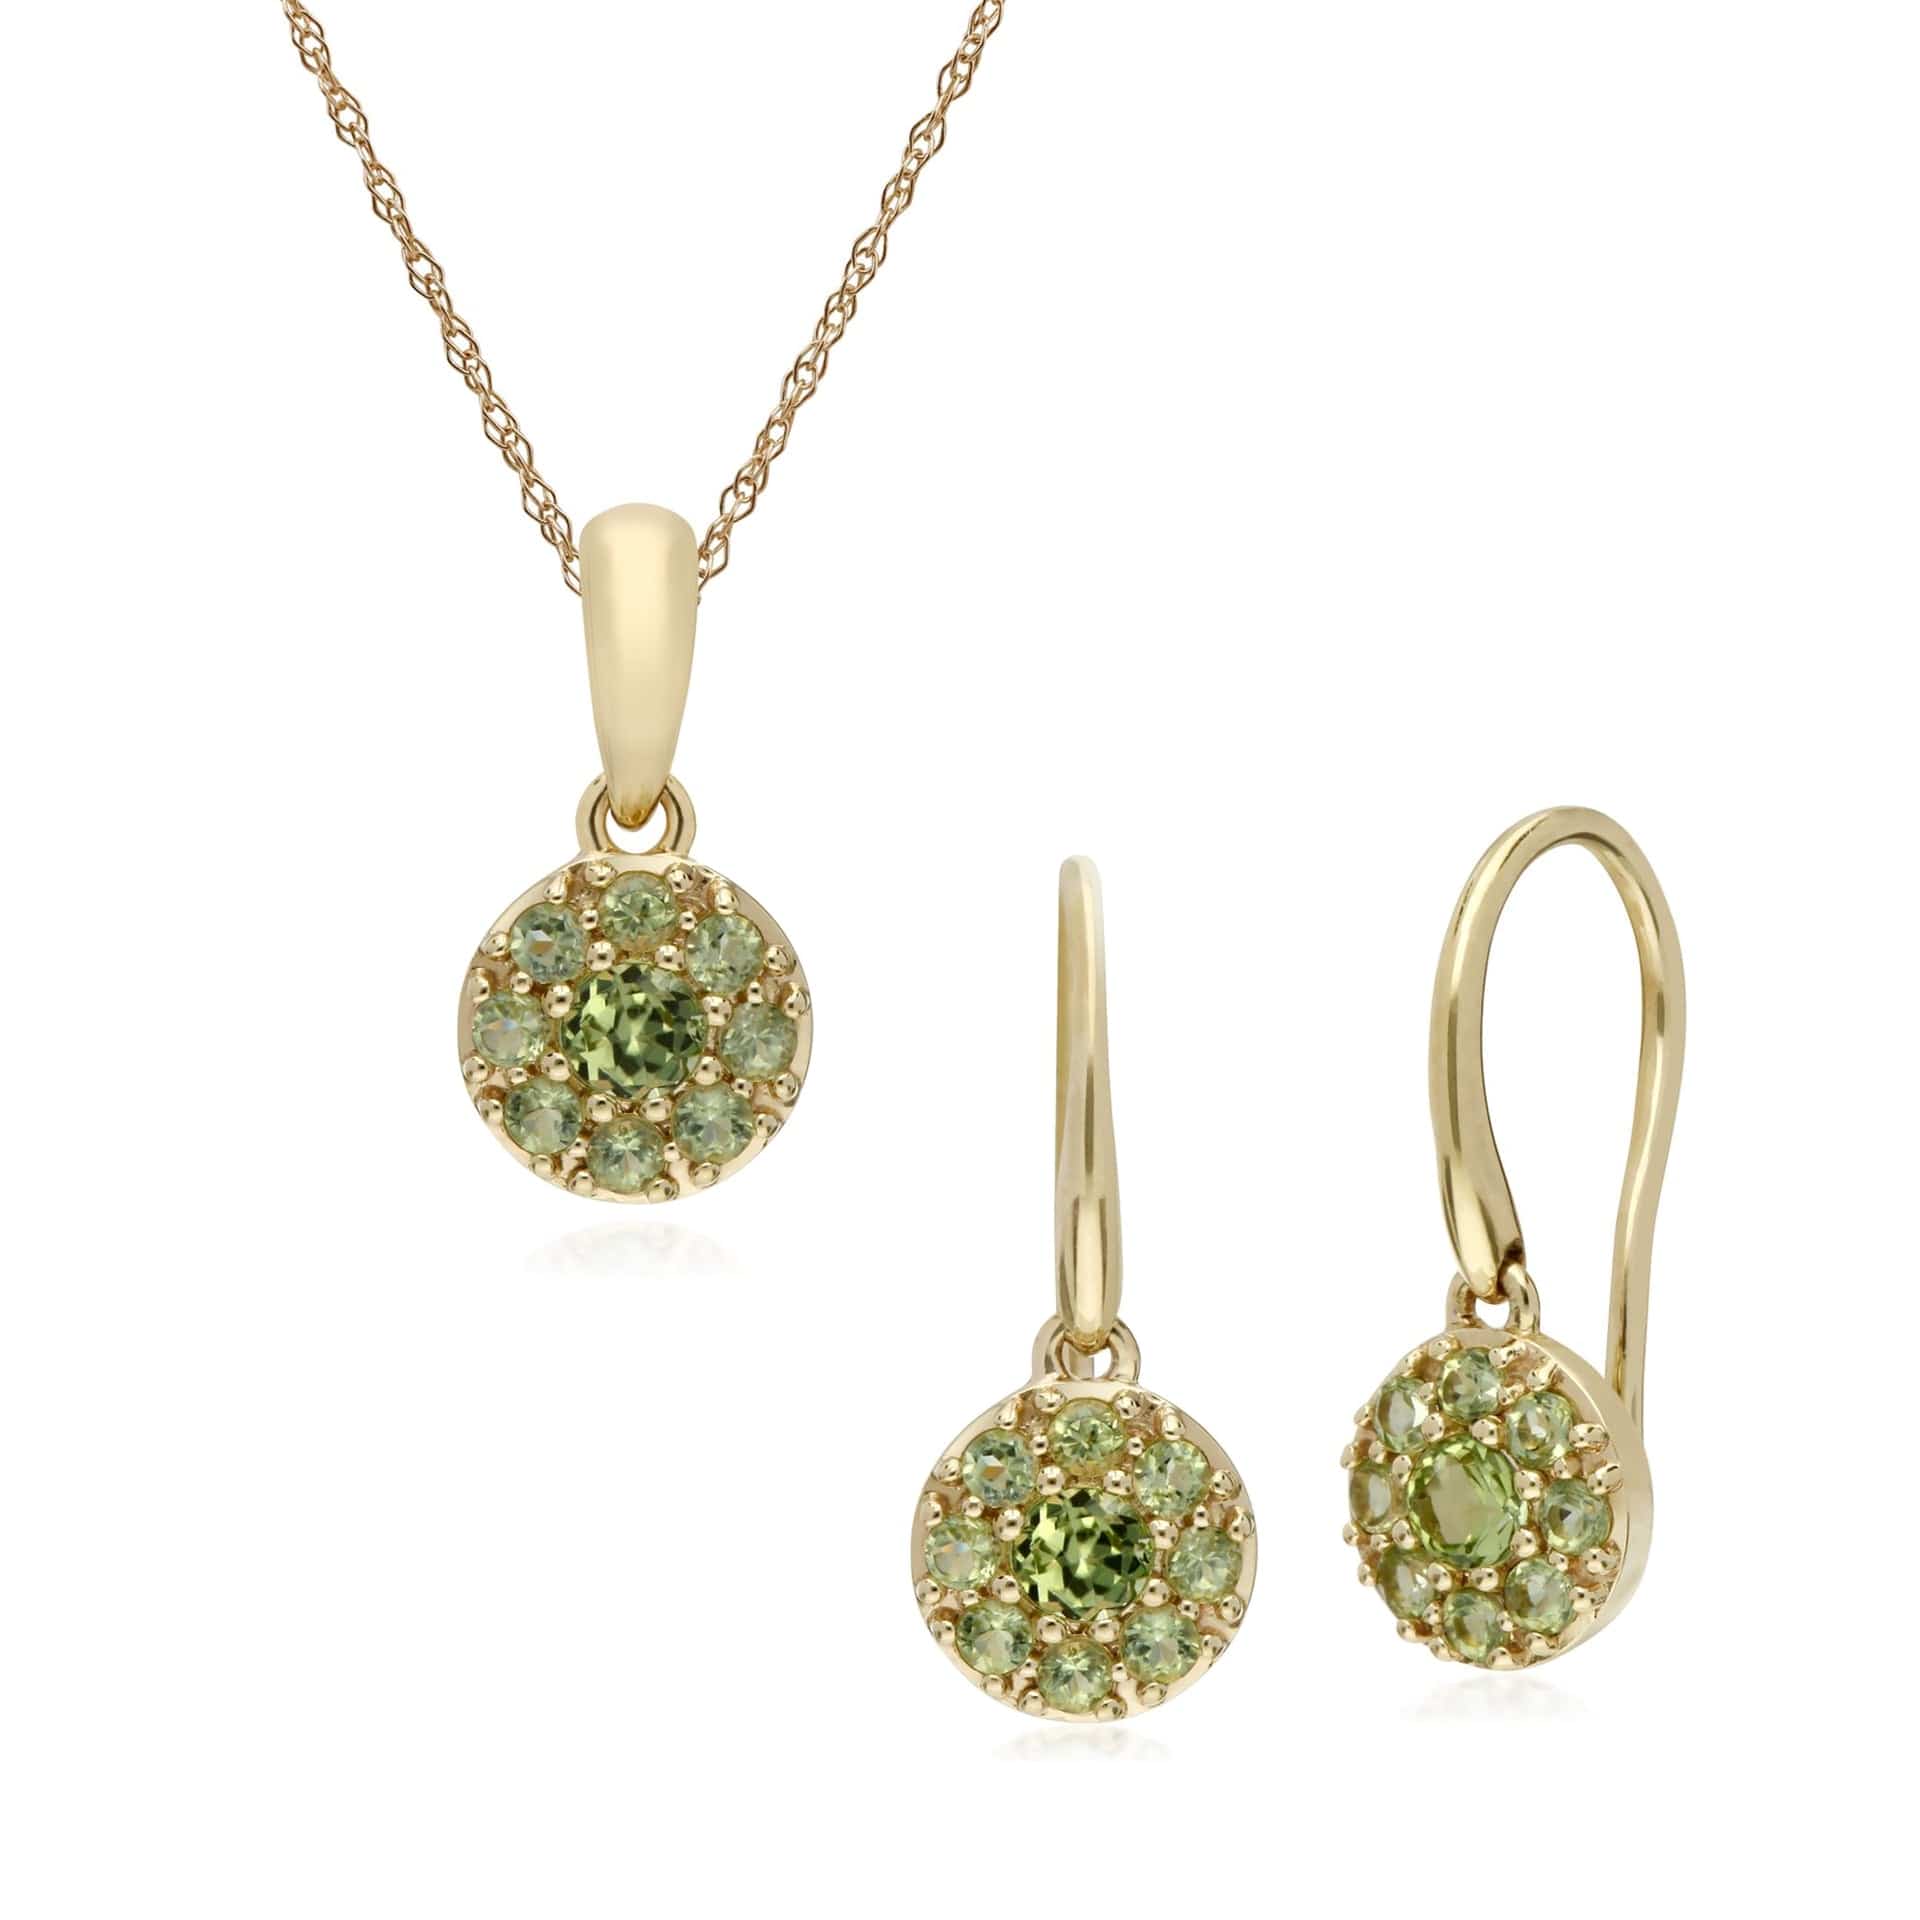 135E1573079-135P1910079 Classic Round Peridot Cluster Drop Earrings & Pendant Set in 9ct Yellow Gold 1